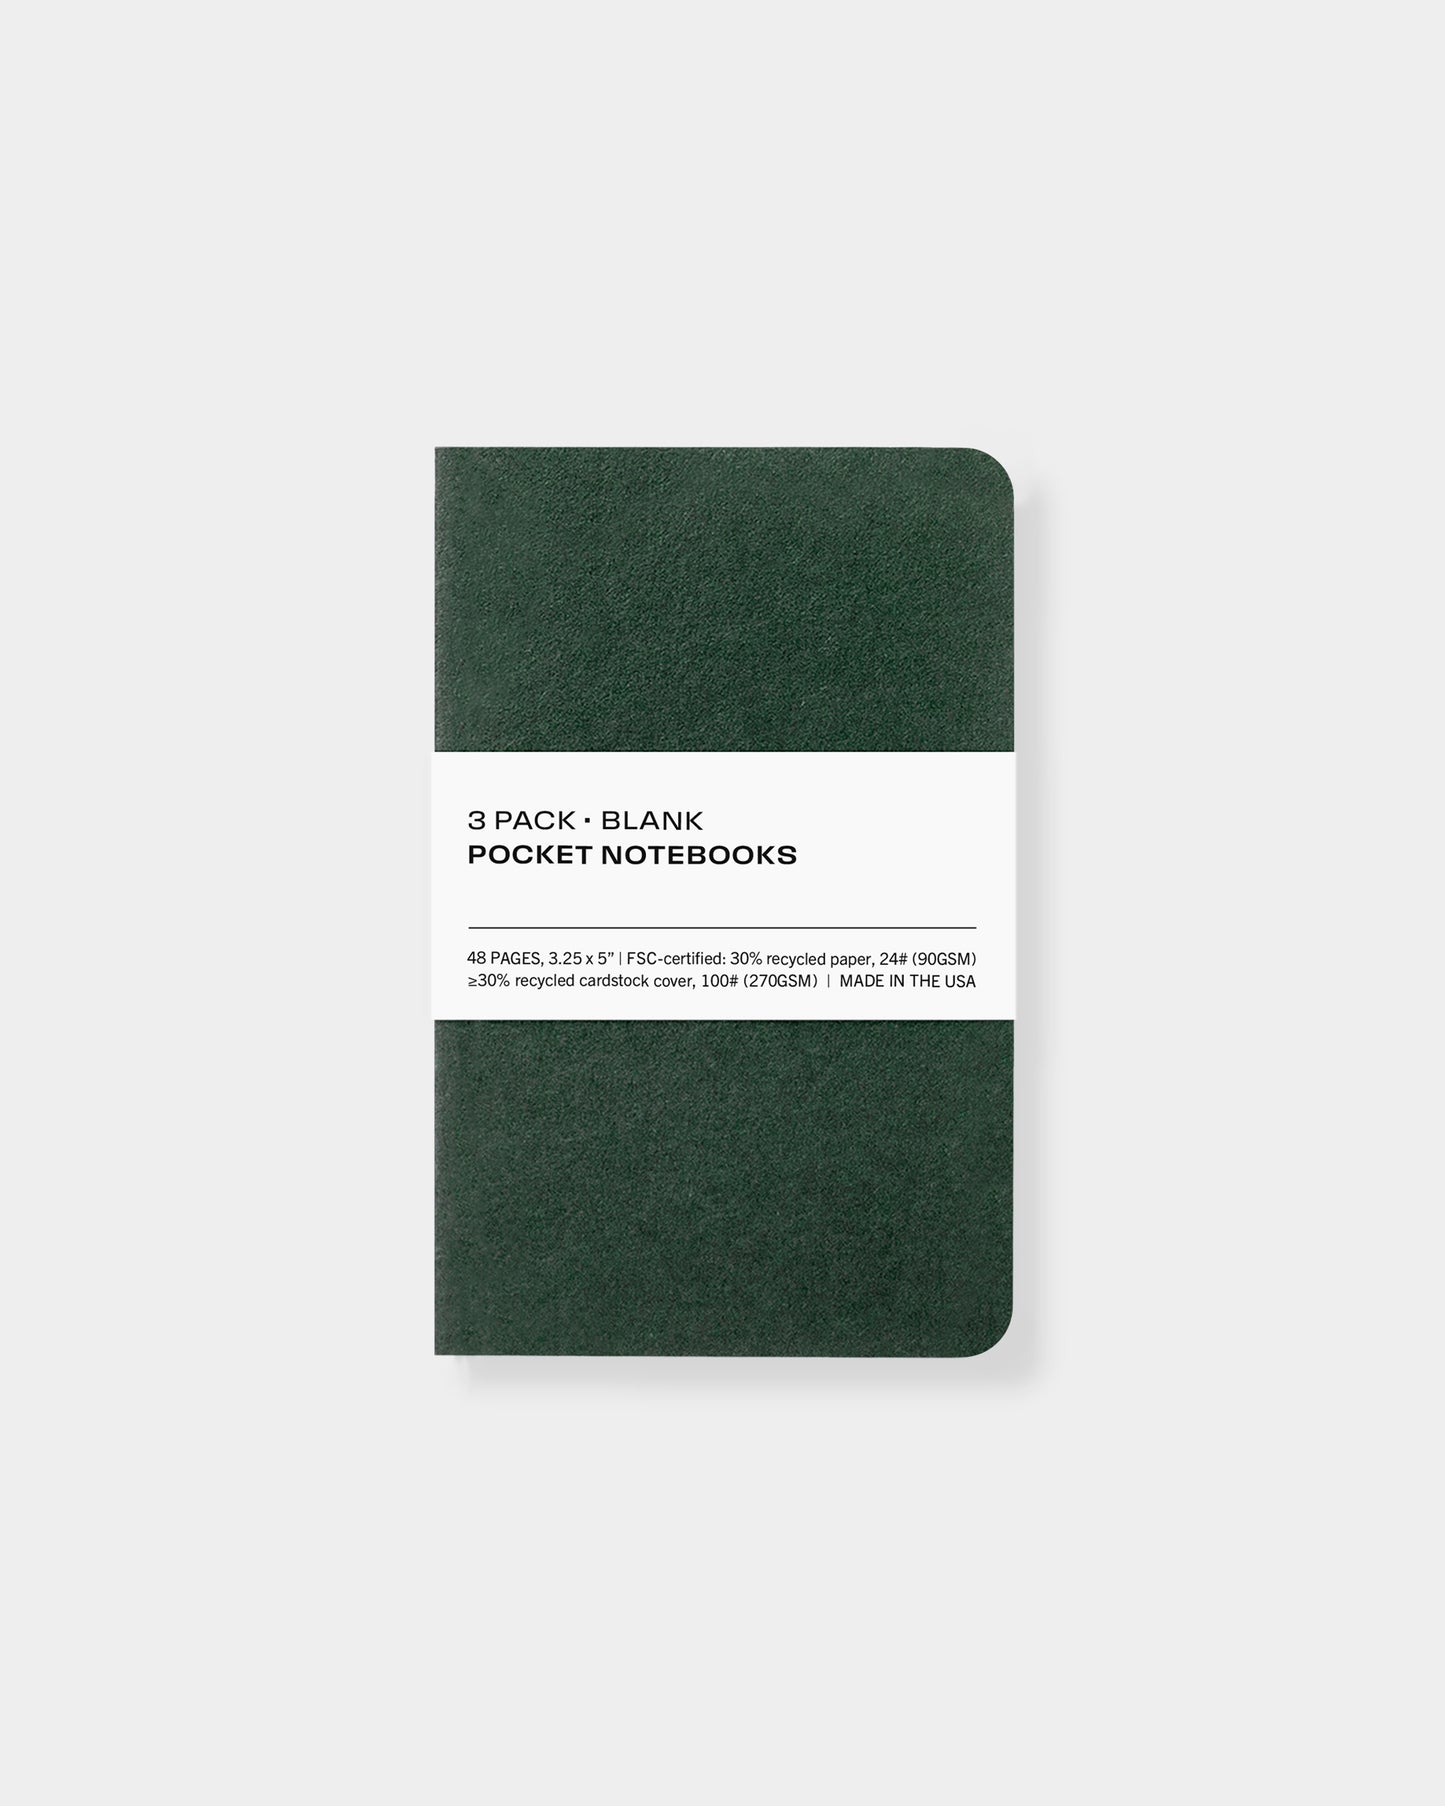 3 pack pocket notebooks, 3.25 x 5", made with eco-friendly papers. Blank pages, evergreen color way.